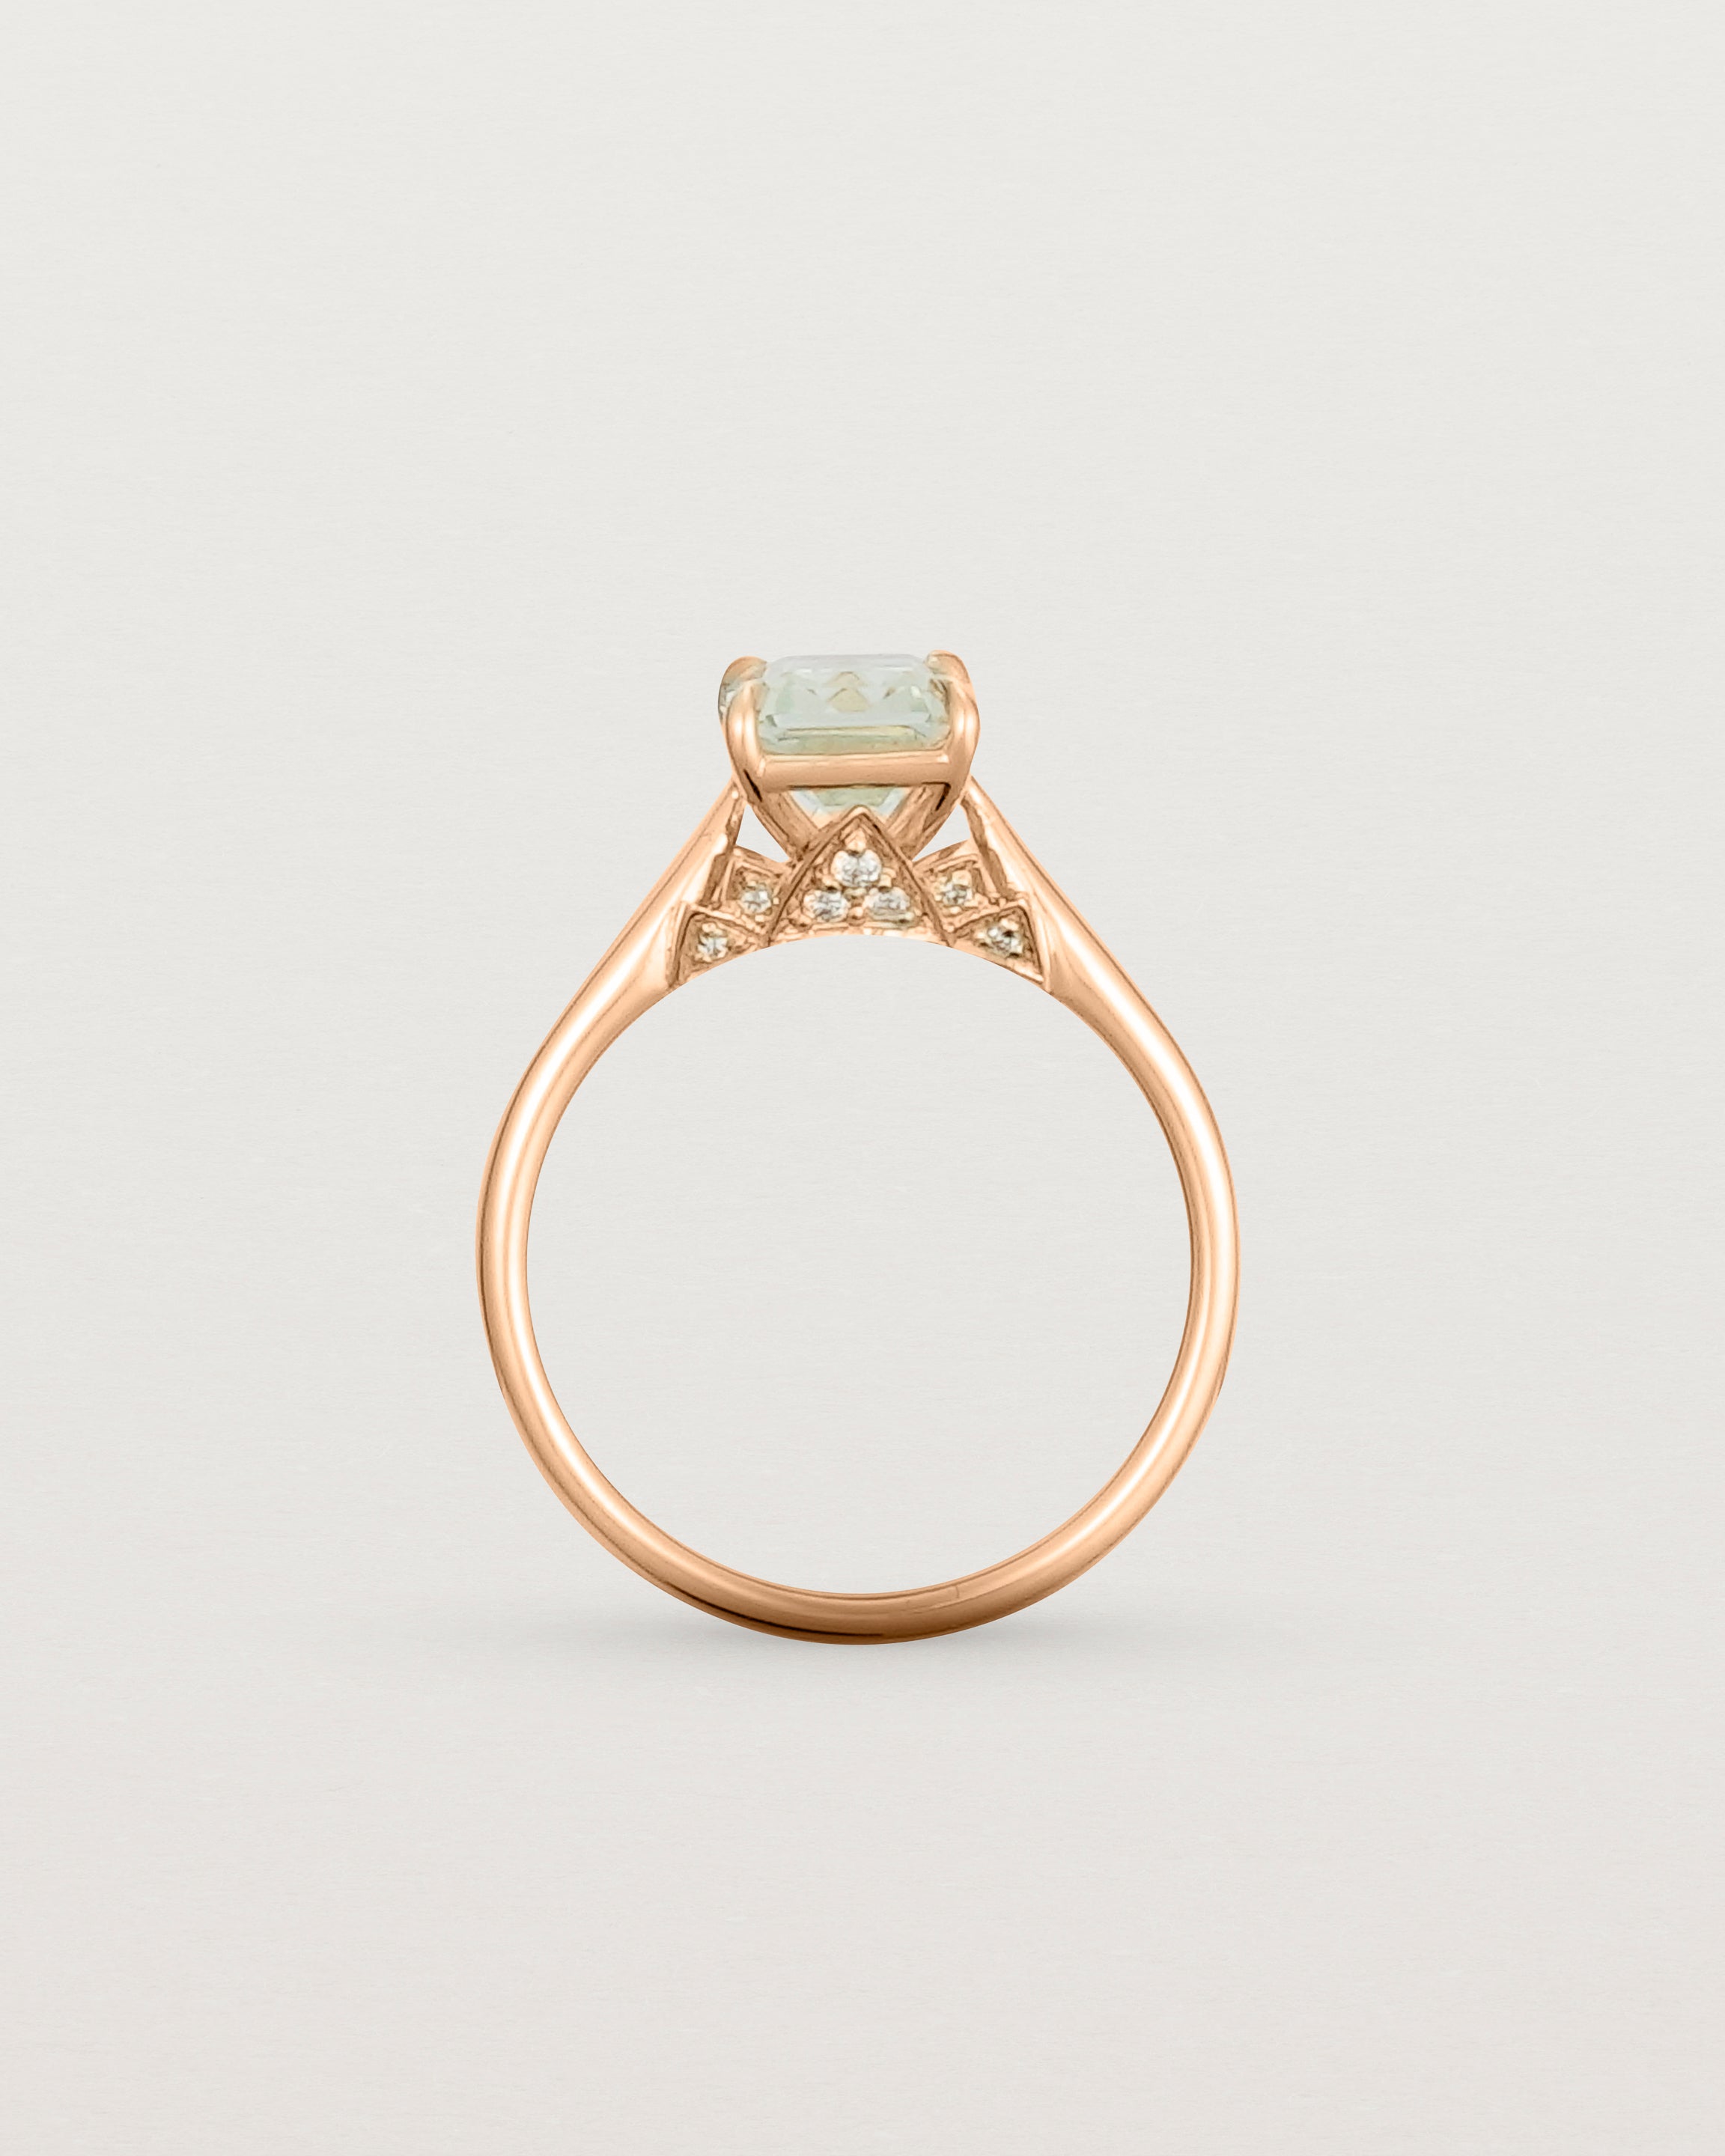 Standing view of the Kalina Emerald Solitaire | Green Amethyst | Rose Gold.